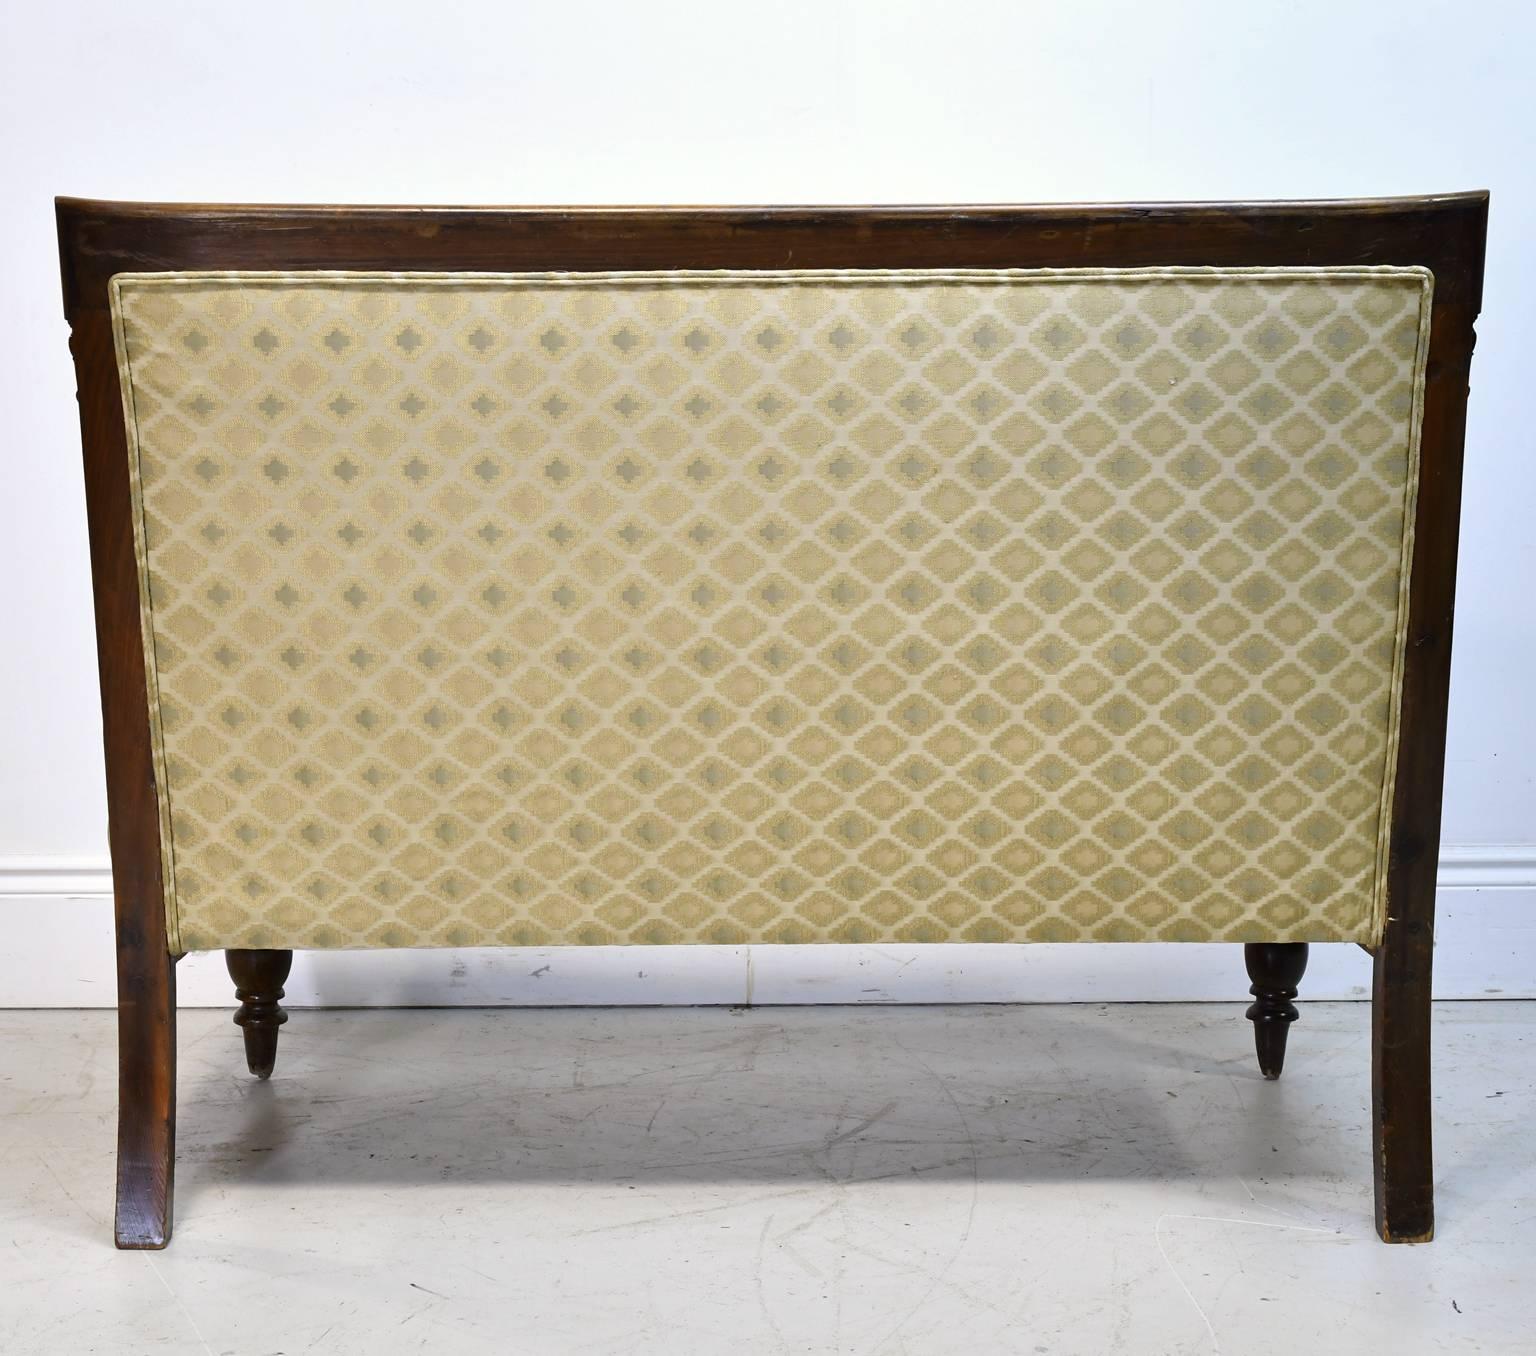 19th Century Danish Canapé Sofa Settee Loveseat in Walnut with Upholstery In Good Condition For Sale In Miami, FL